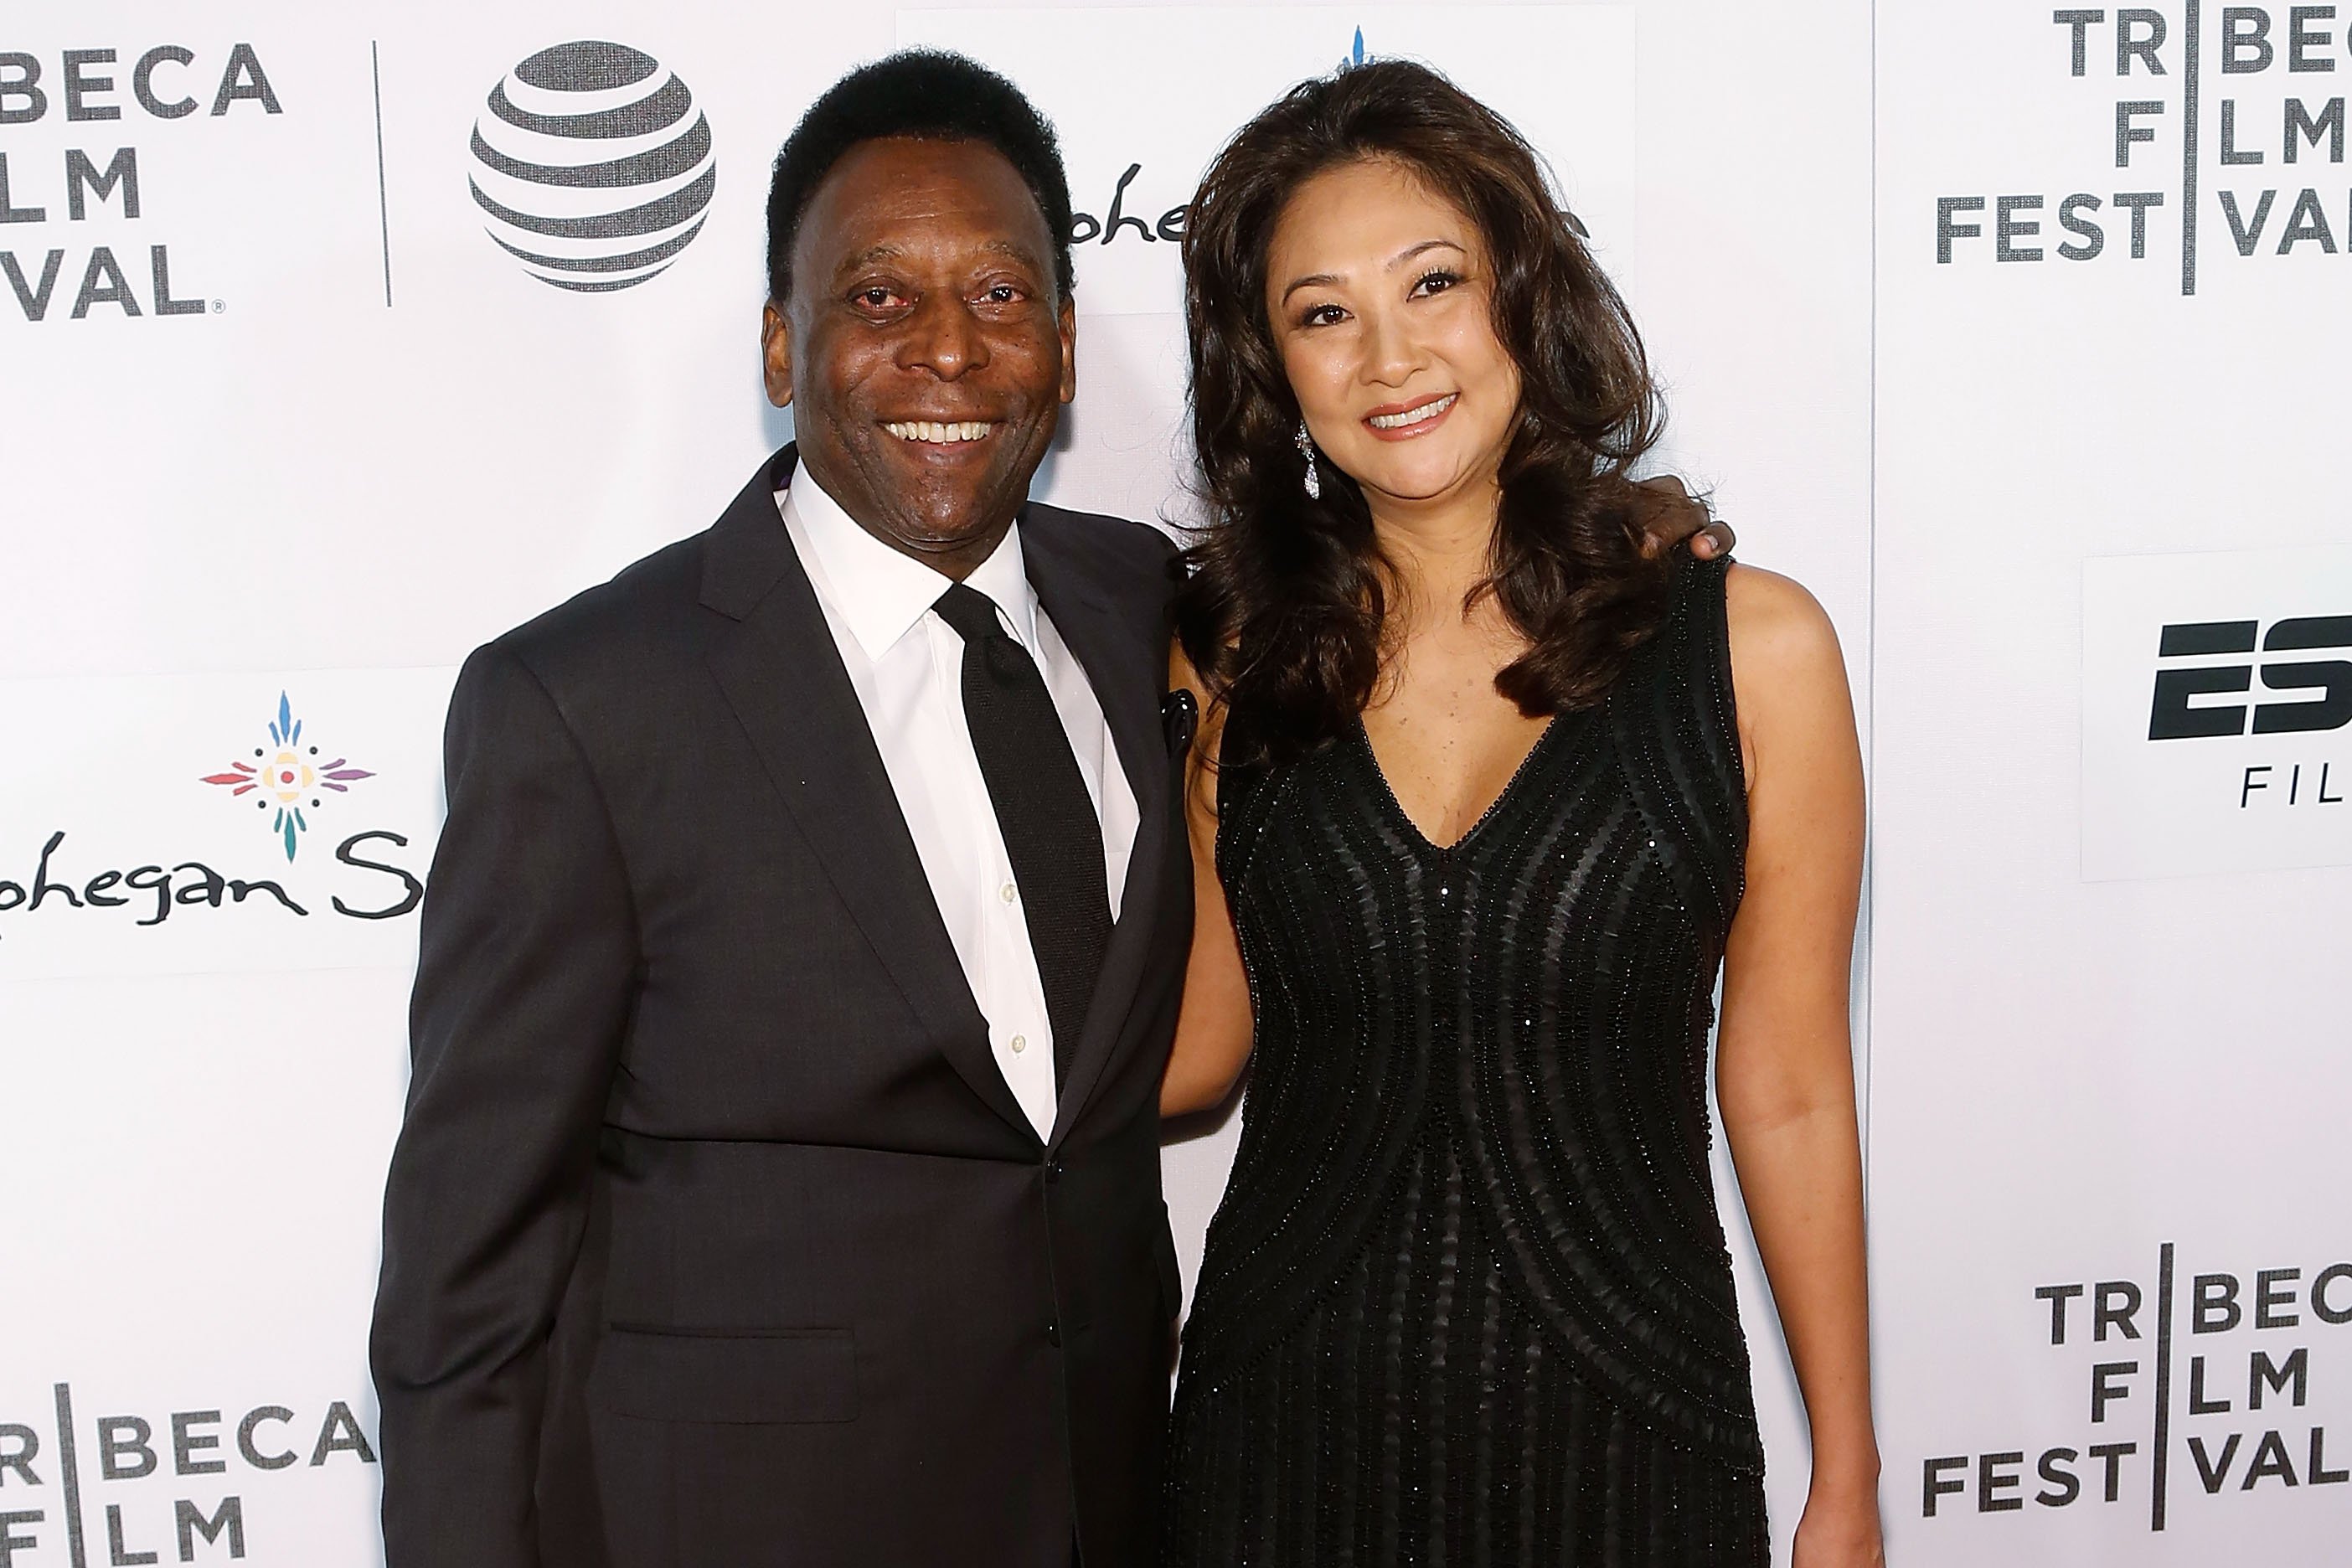 Pele and Marcia Aoki attend the premiere of 